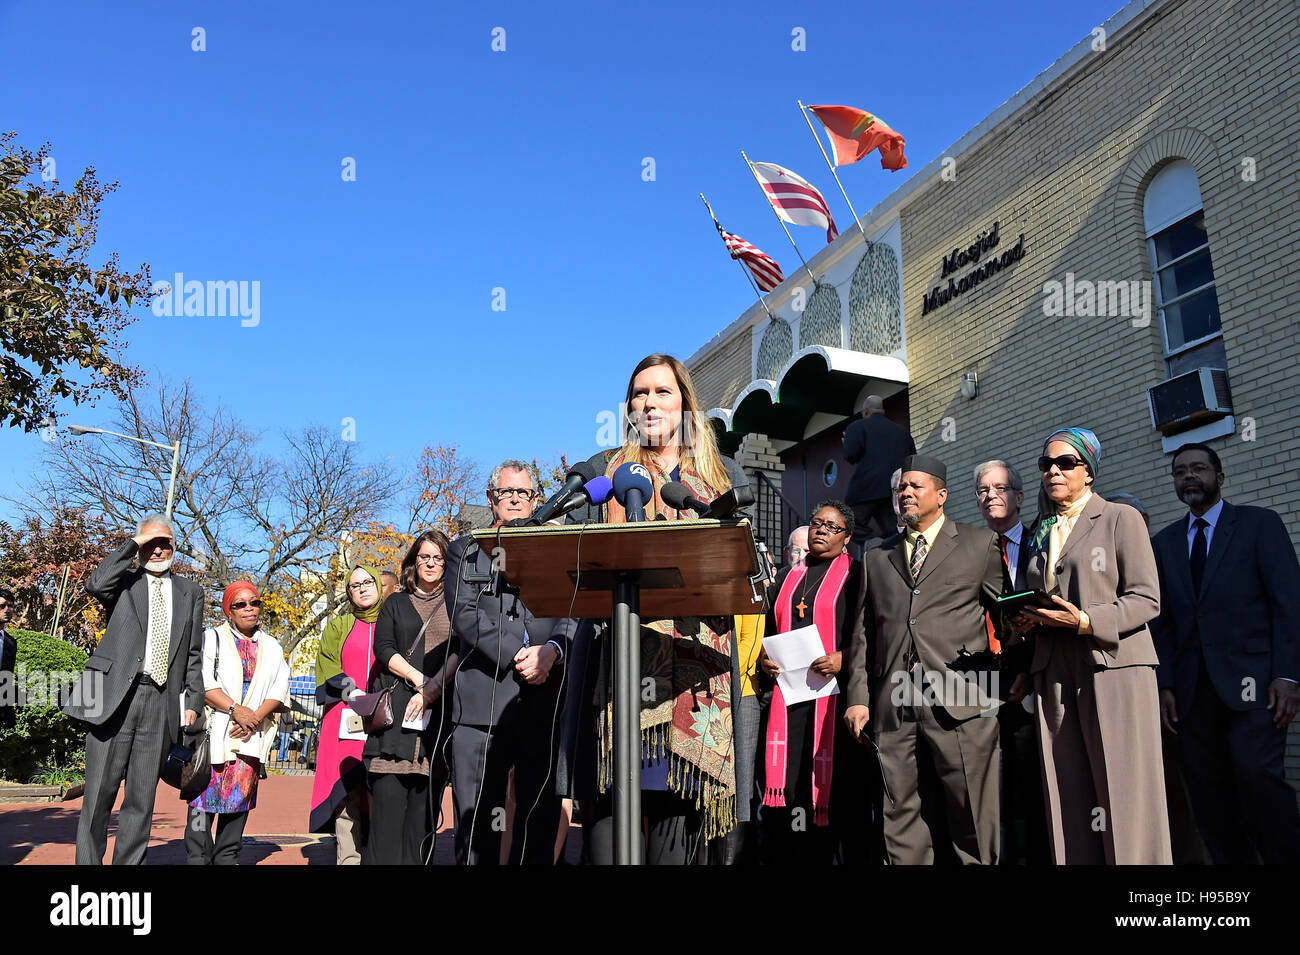 Washington, Us. 18th Nov, 2016. Catherine Orsborn (pictured), Campaign Director of Shoulder to Shoulder, an interfaith organization dedicated to ending anti-Muslim bigotry, speaks at a press conference calling on President-elect Donald Trump to respect religious liberty. In the aftermath of the election and in response to the rising hate crimes against Muslims, national Christian and Jewish leaders joined their Muslim colleagues at Masjid Muhammad in Washington, DC on Friday, November 18, 2016 for the daily Muslim prayer service. Credit: Ron Sachs/CNP - NO WIRE SERVICE - Credit:  dpa/Alamy Liv Stock Photo